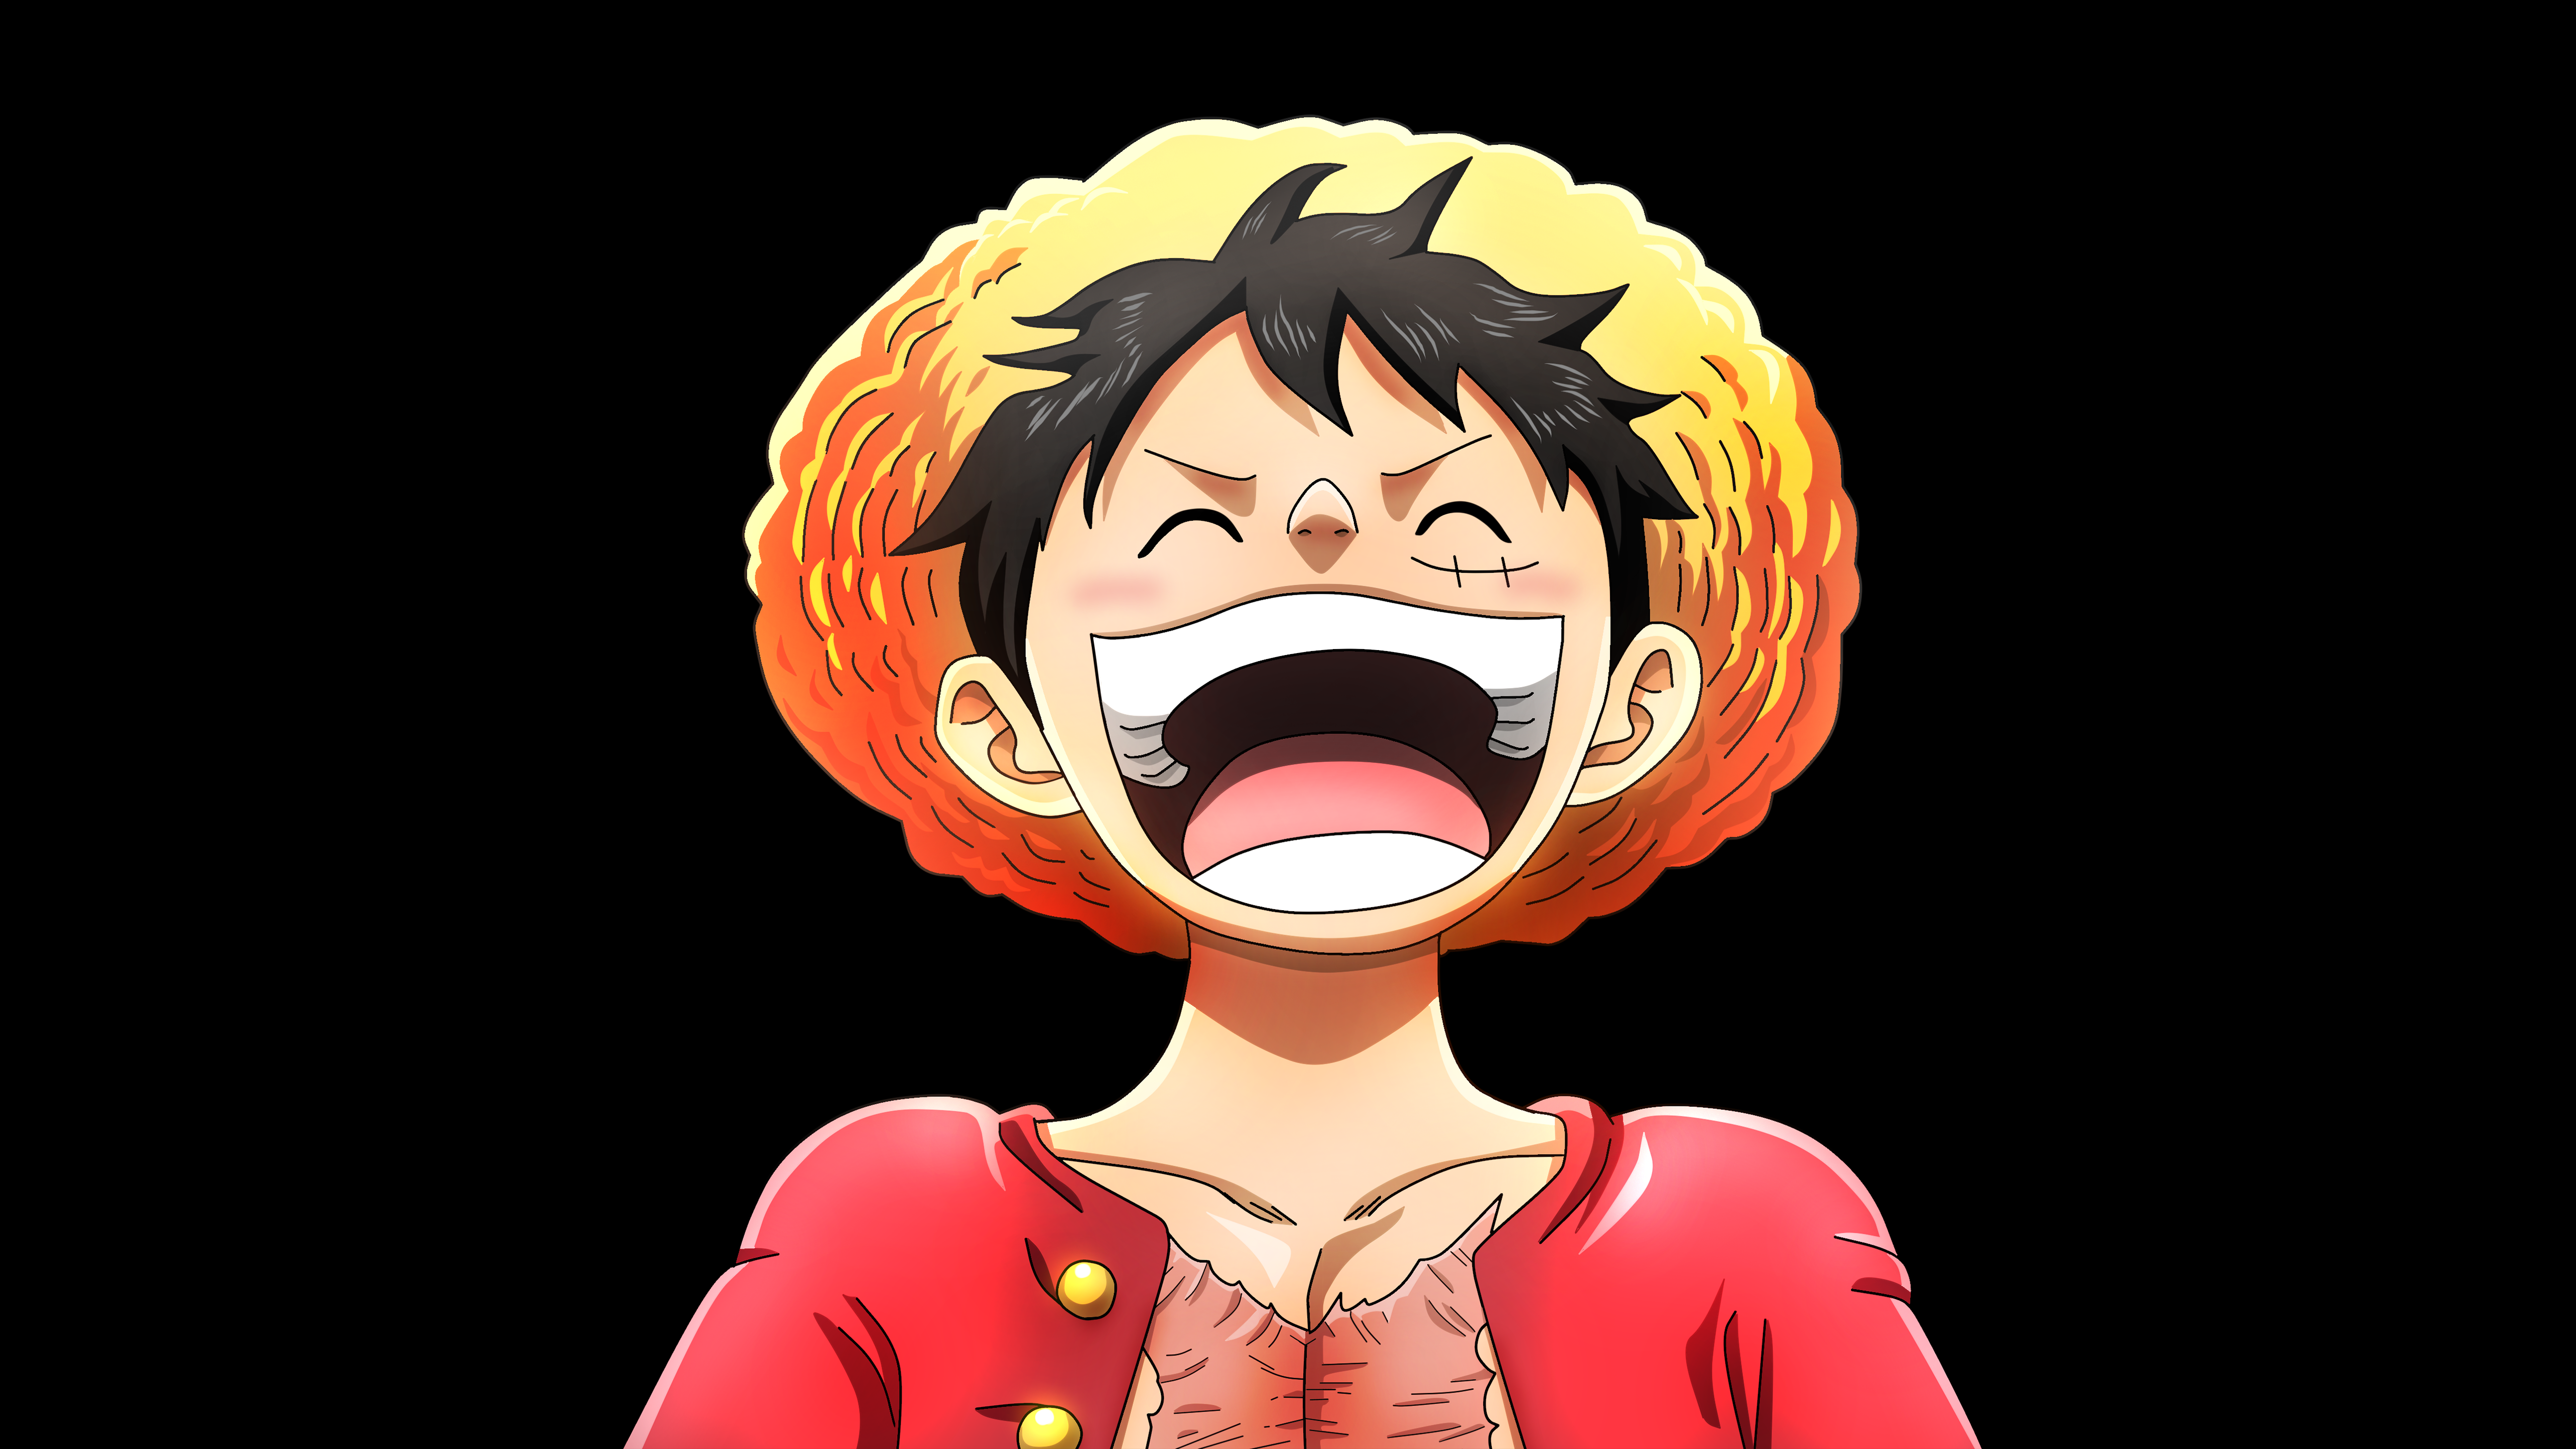 Luffy One Piece wallpaper by EduSaborio  Download on ZEDGE  7e03